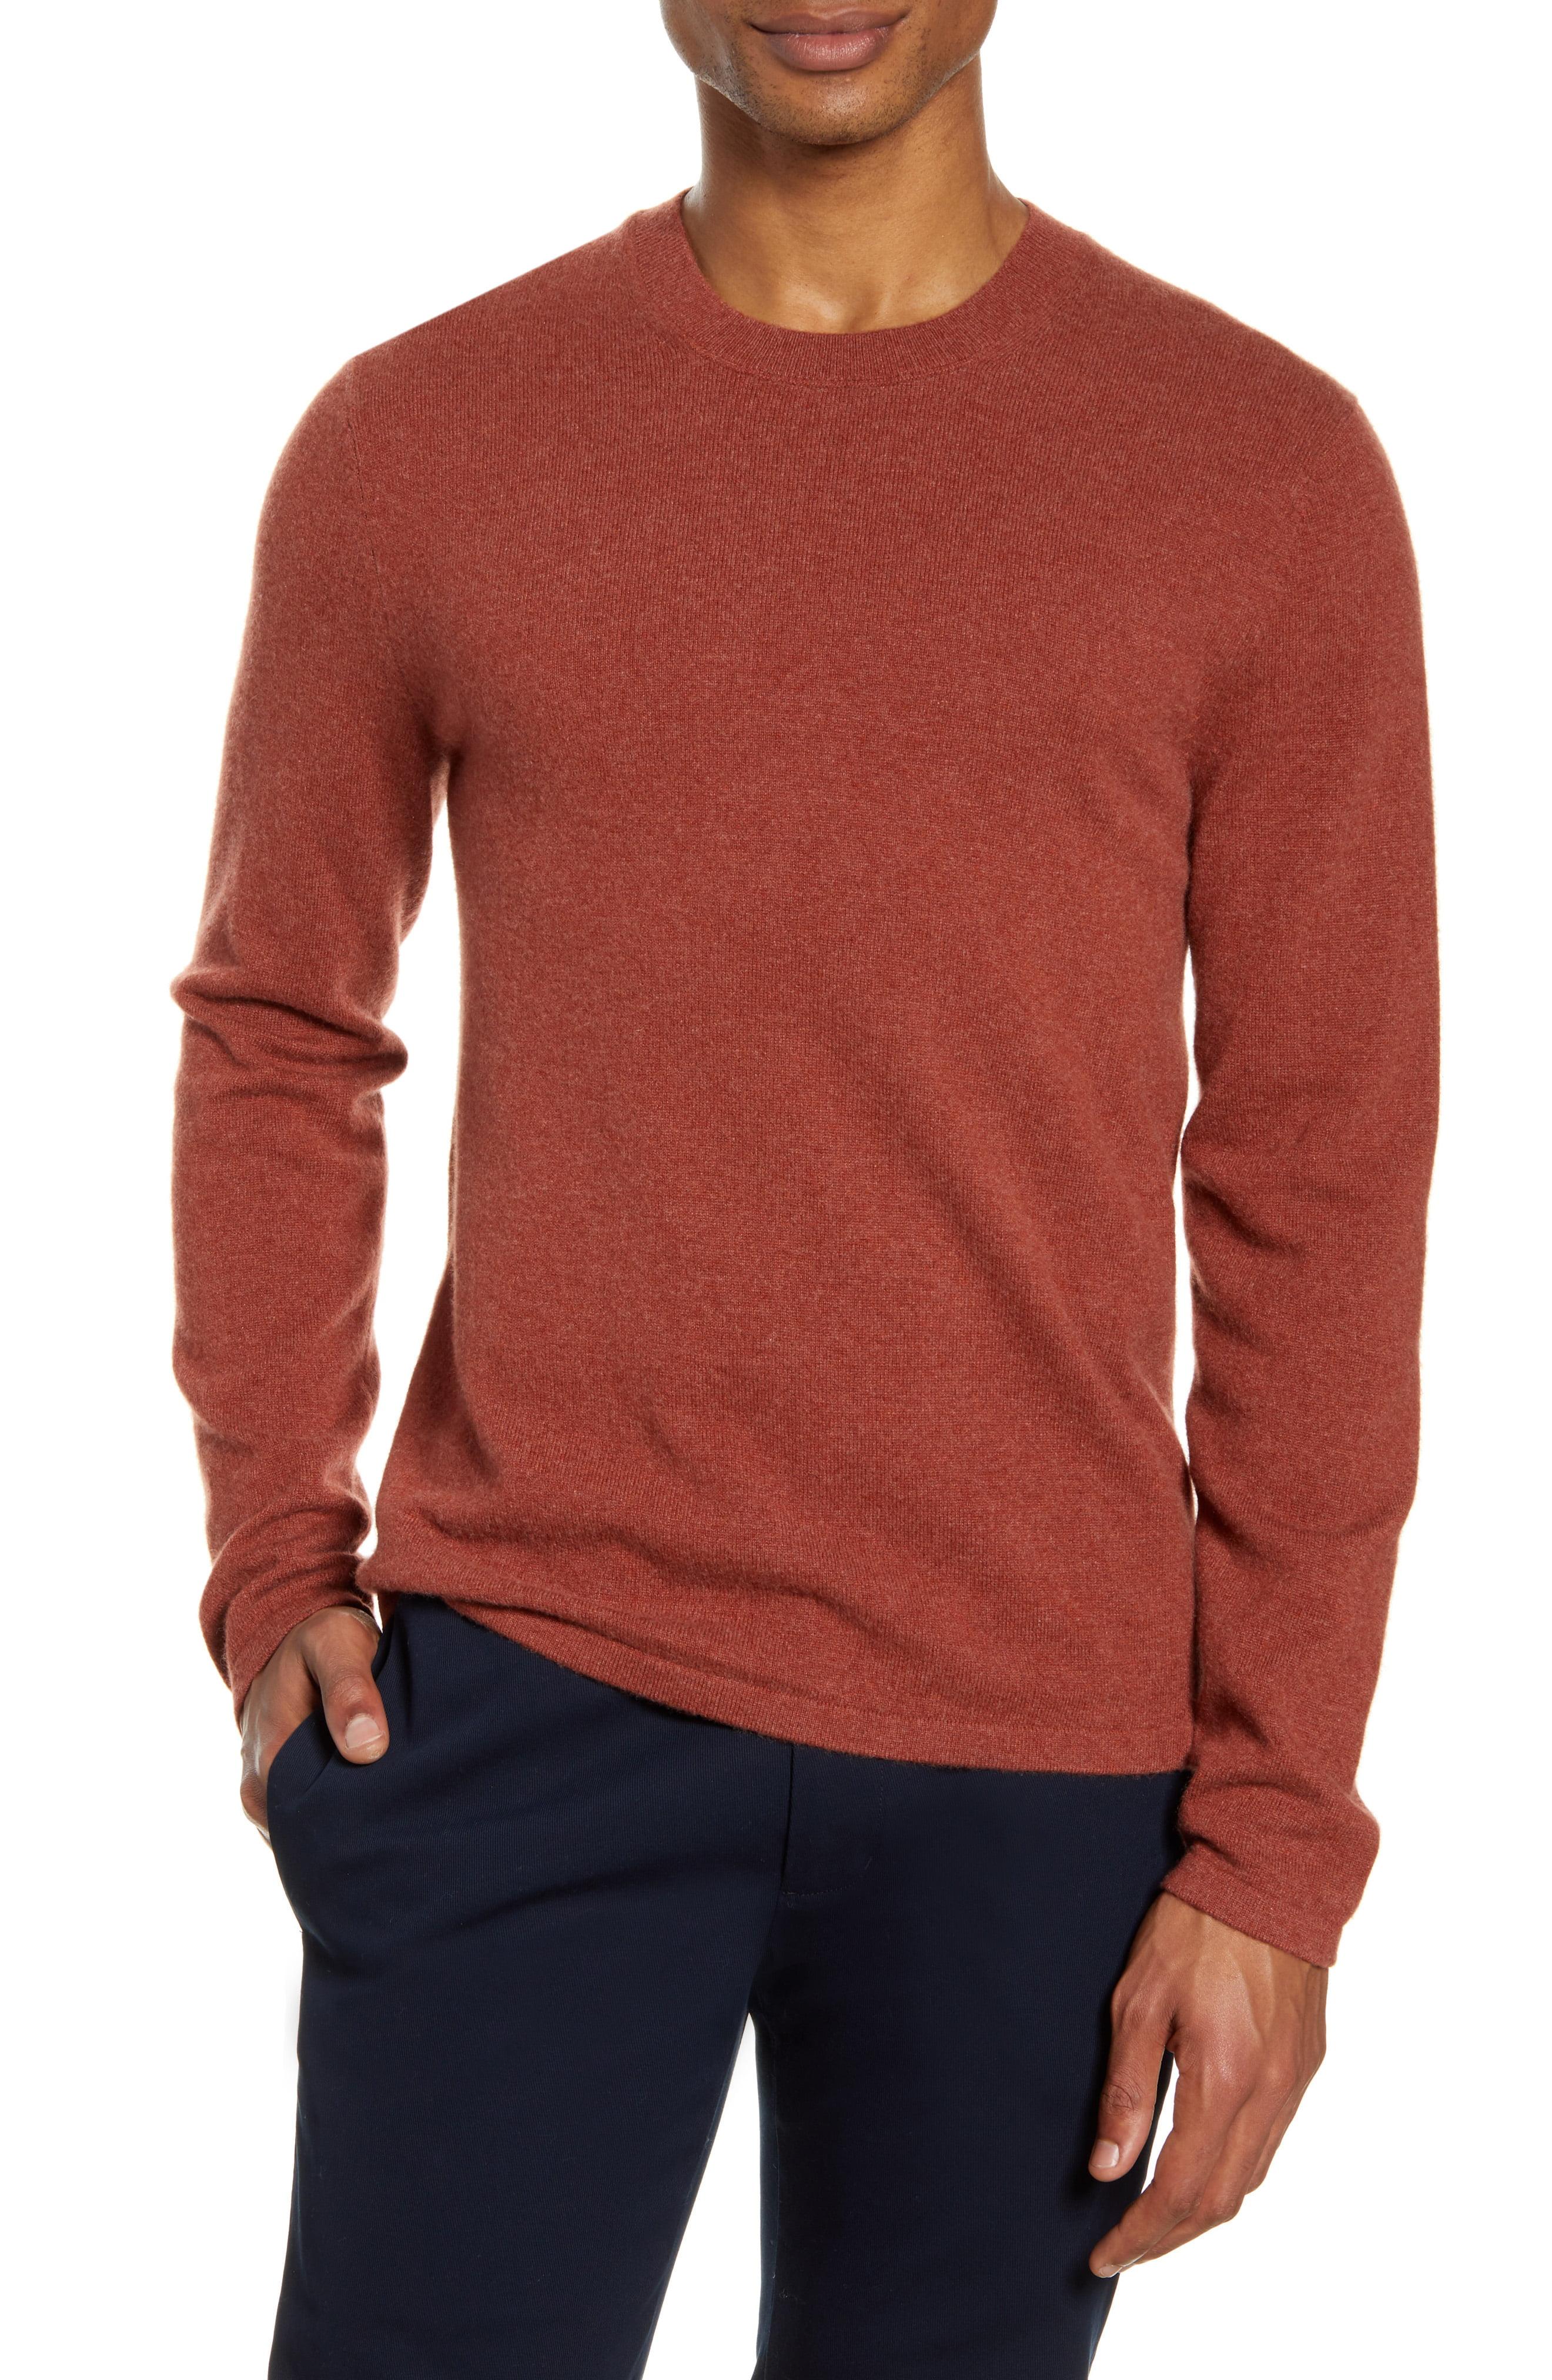 Vince Cashmere Crewneck Sweater in Heather Rust (Red) for Men - Lyst